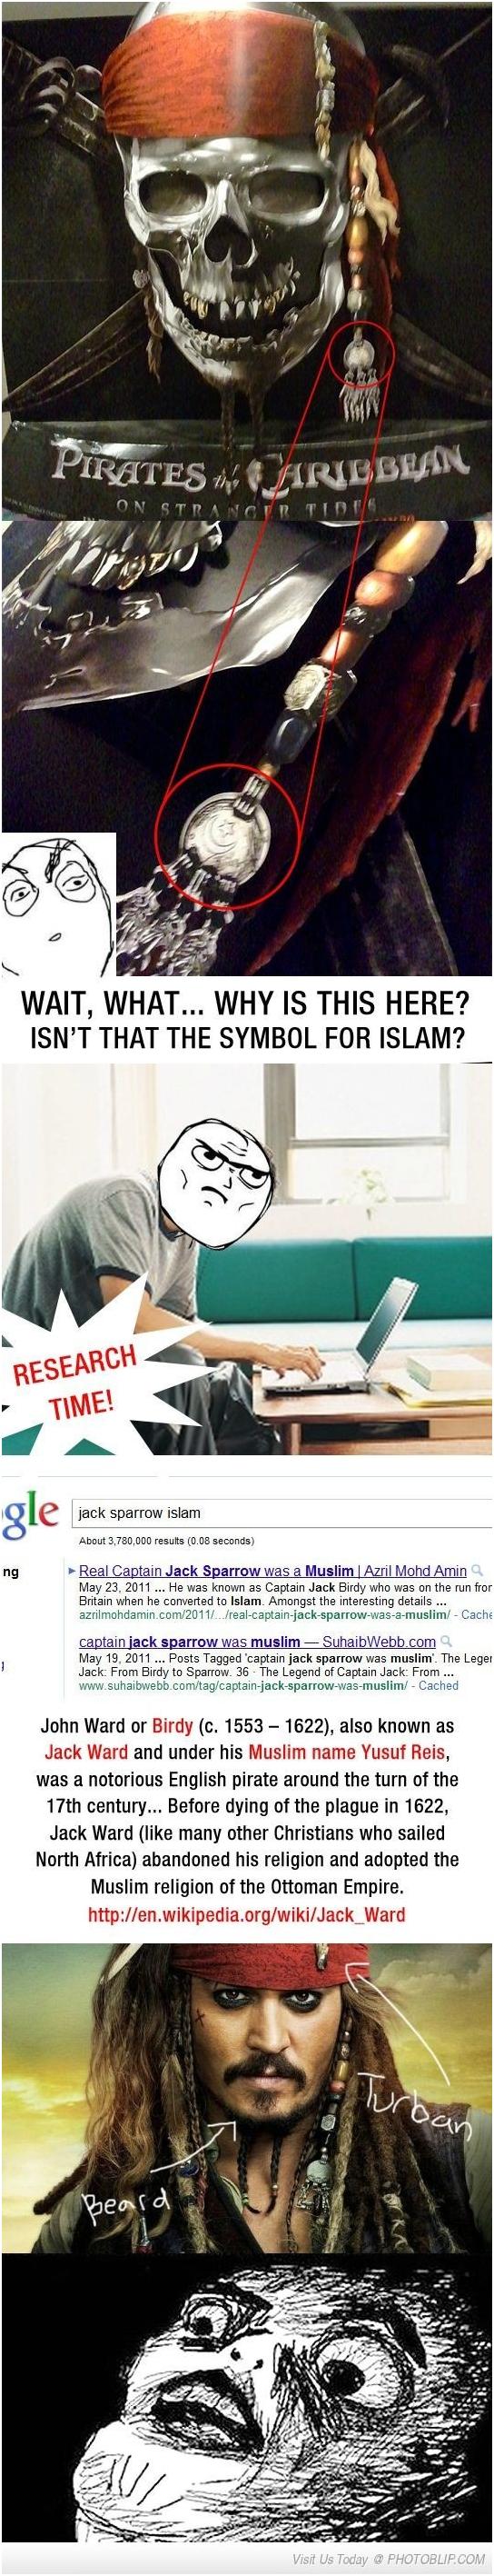 pirates of the caribbean memes - Pirates Karibbean On Strangerti Wait, What... Why Is This Here? Isn'T That The Symbol For Islam? Research Time! gle jack sparrow islam About 3,780,000 results 0.08 seconds ng Real Captain Jack Sparrow was a Muslim Azril Mo